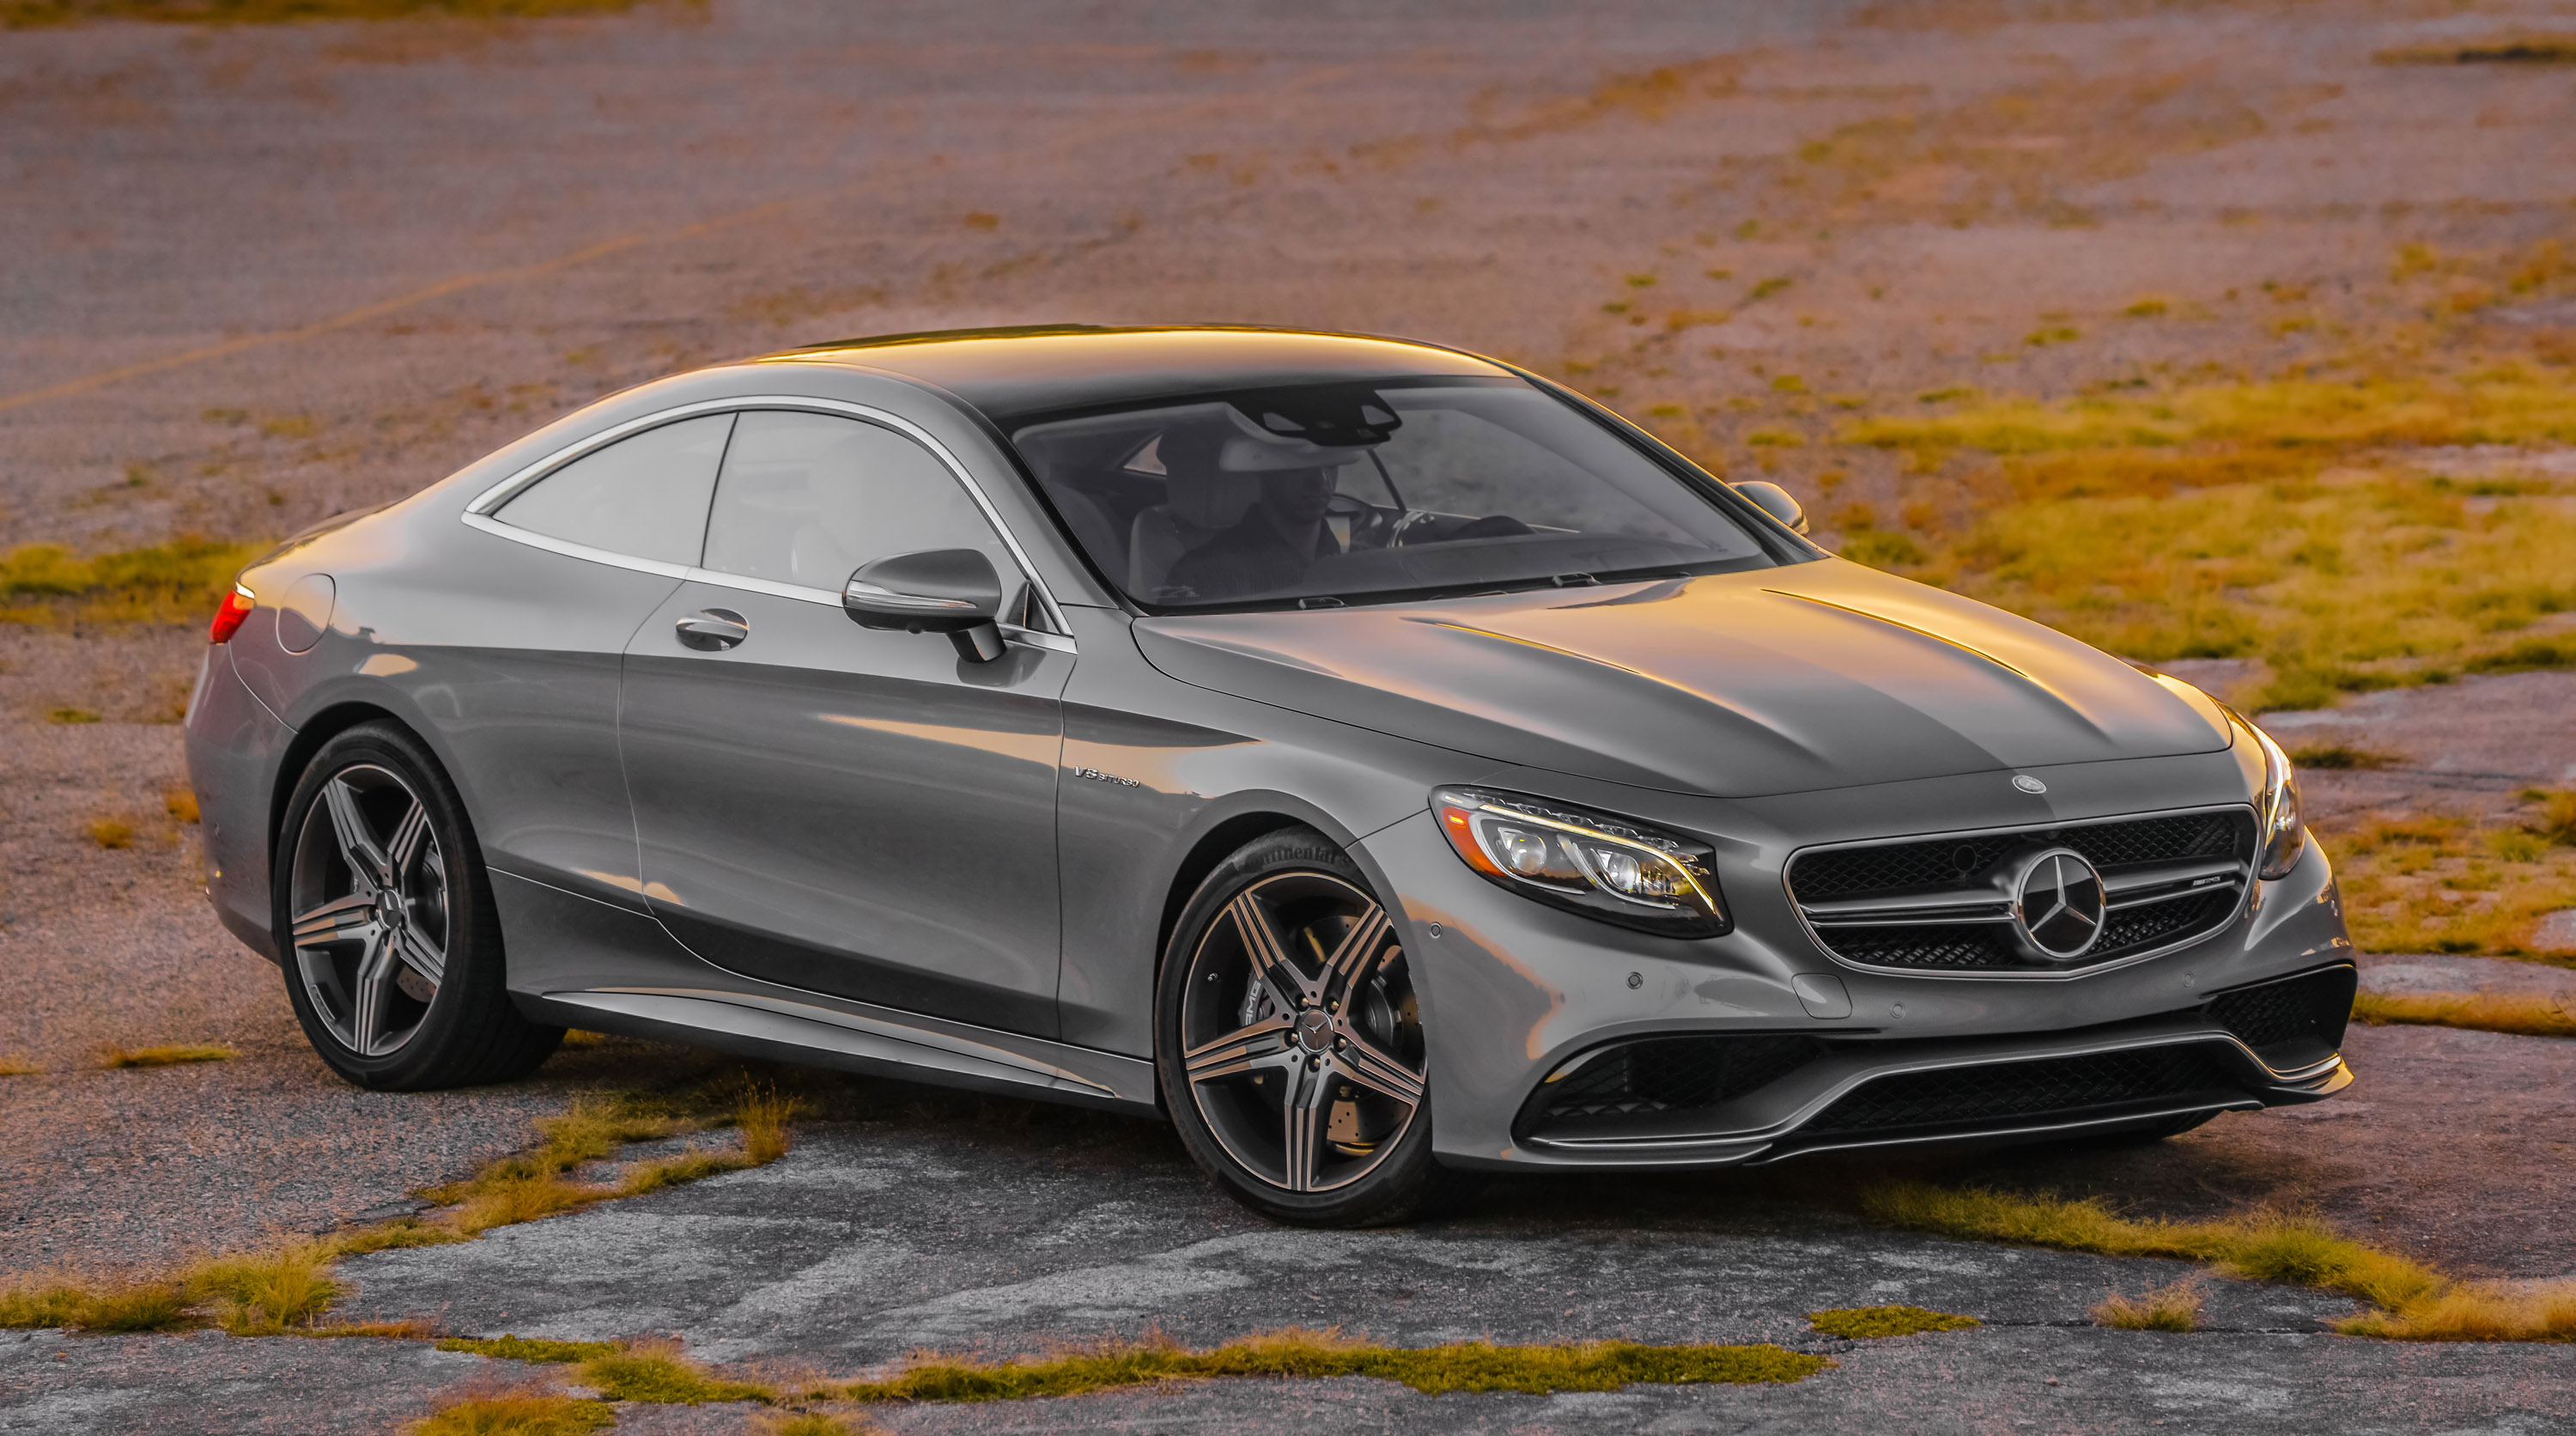 2015 Mercedes Benz S63 AMG 4MATIC All You Need To Know About 2015 Mercedes Benz S63 AMG 4MATIC